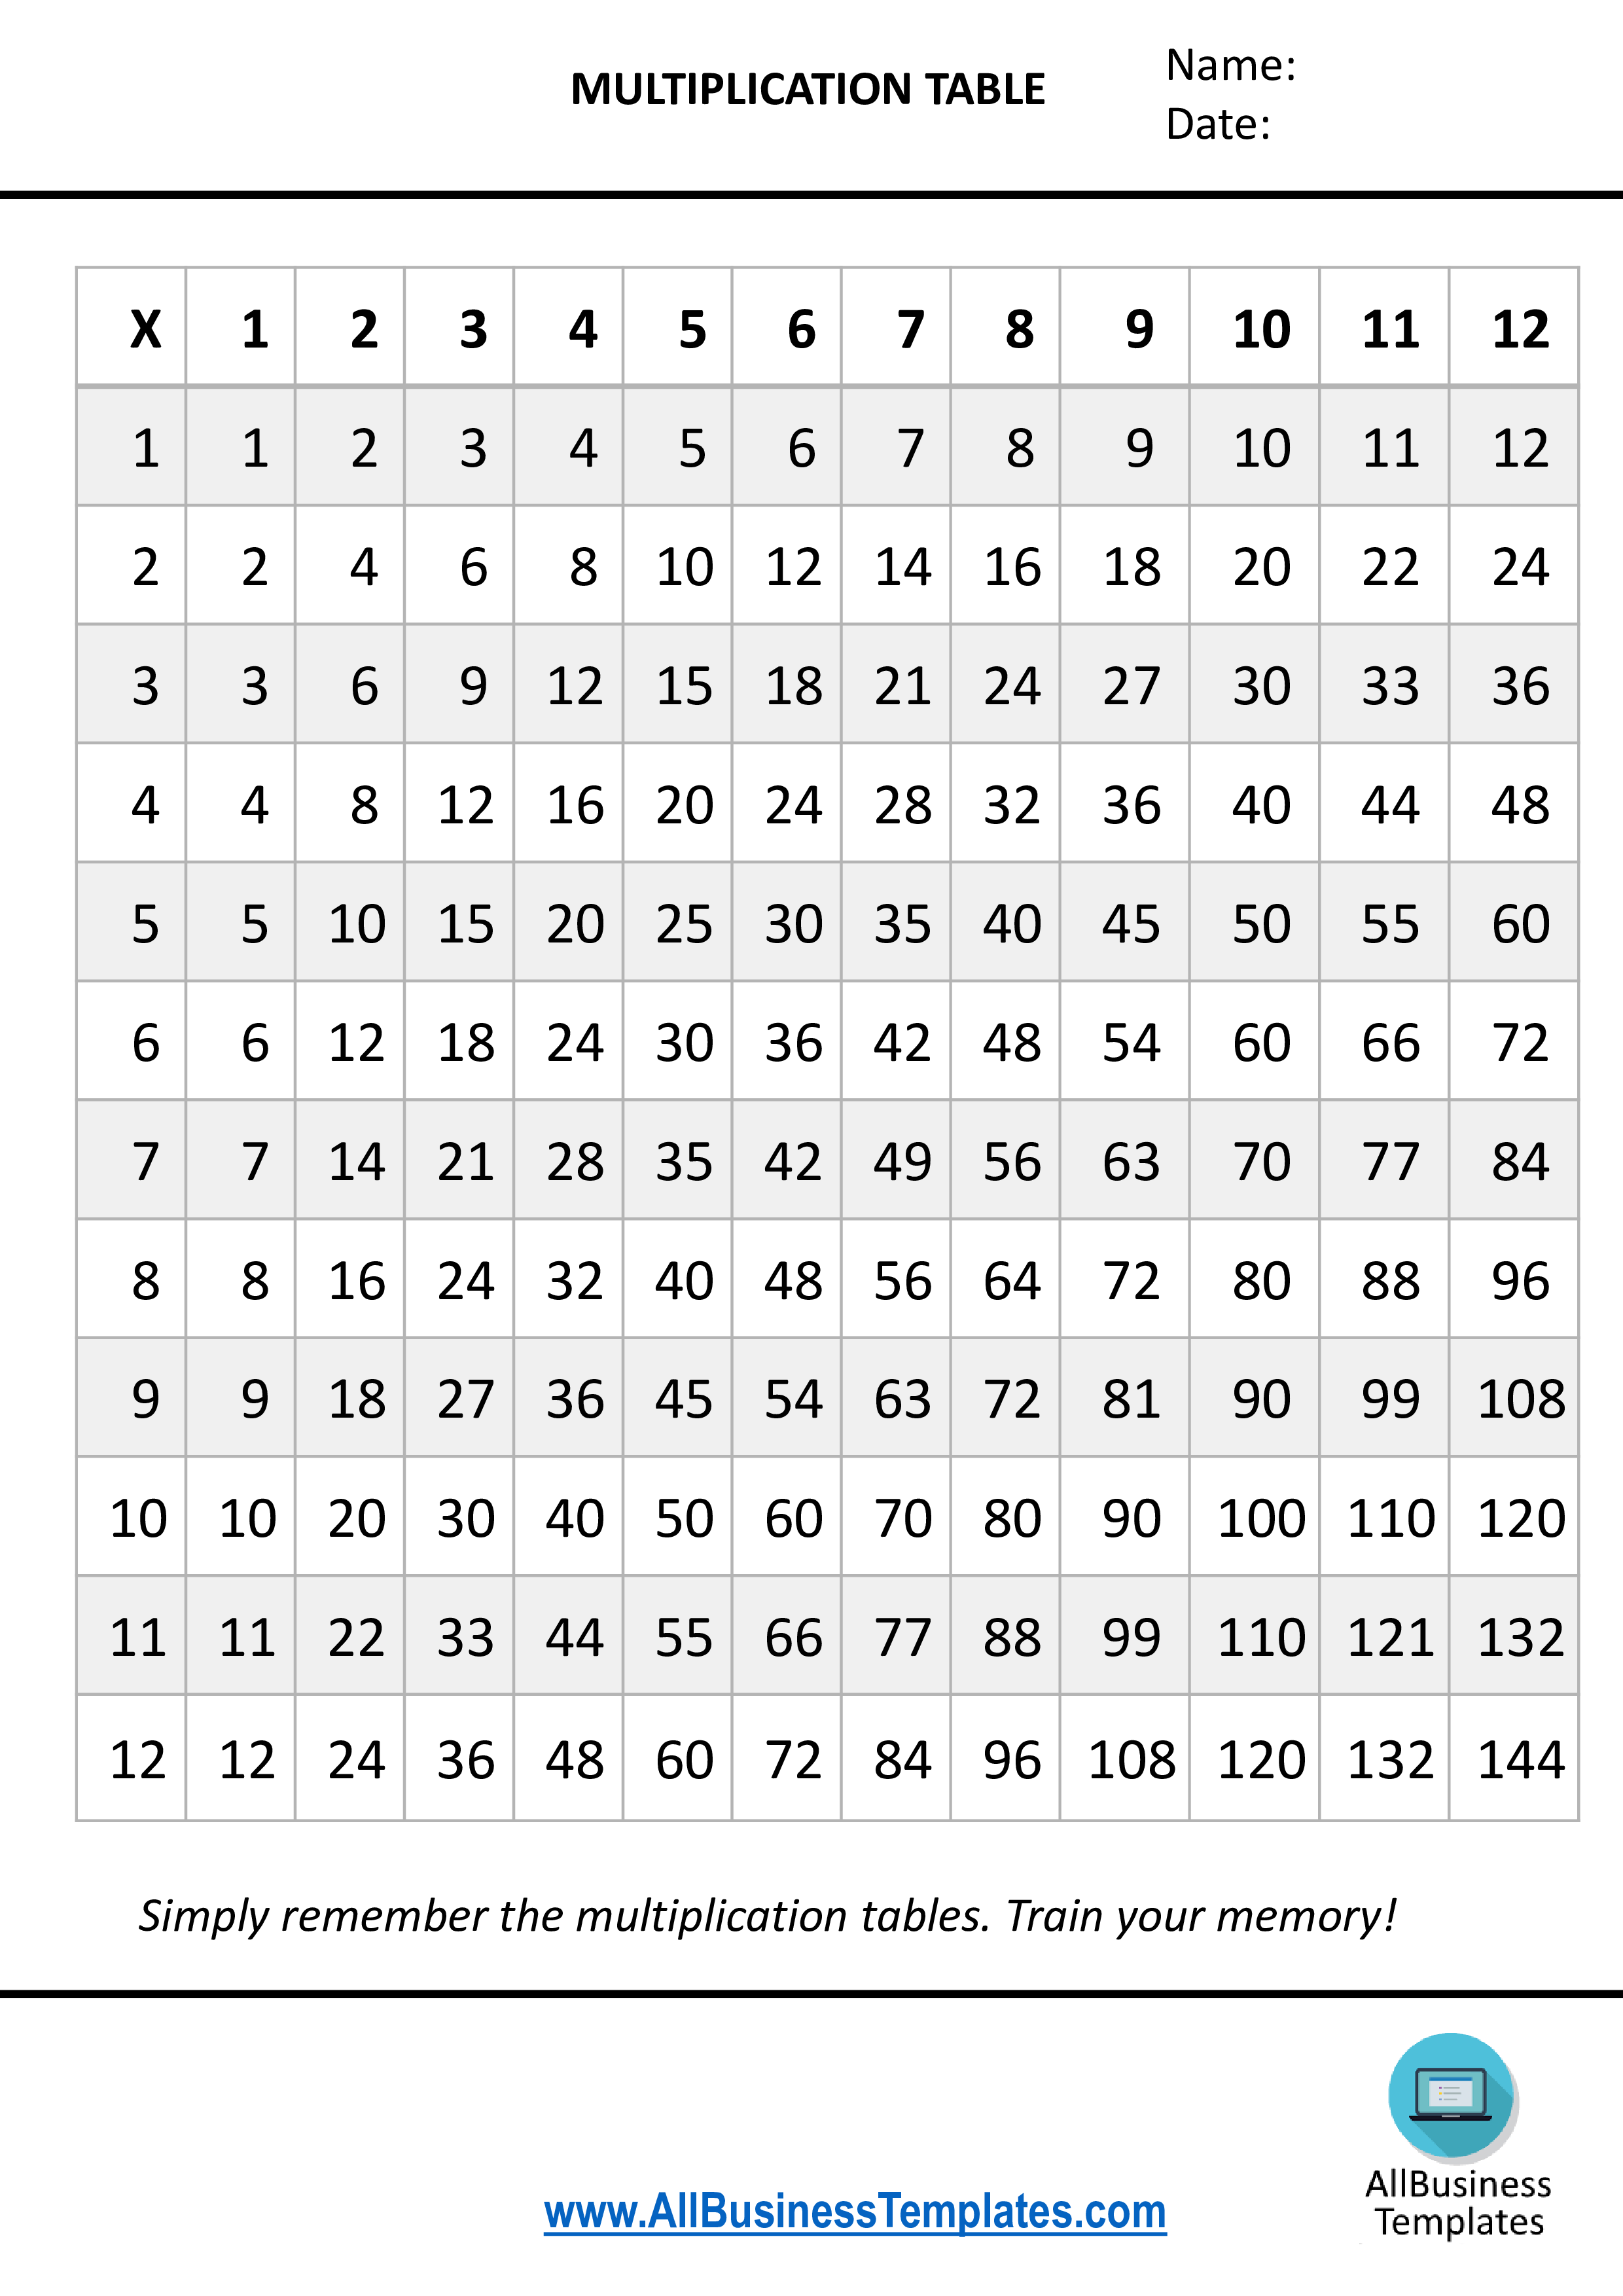 multiplication-table-1-to-12x-templates-at-allbusinesstemplates